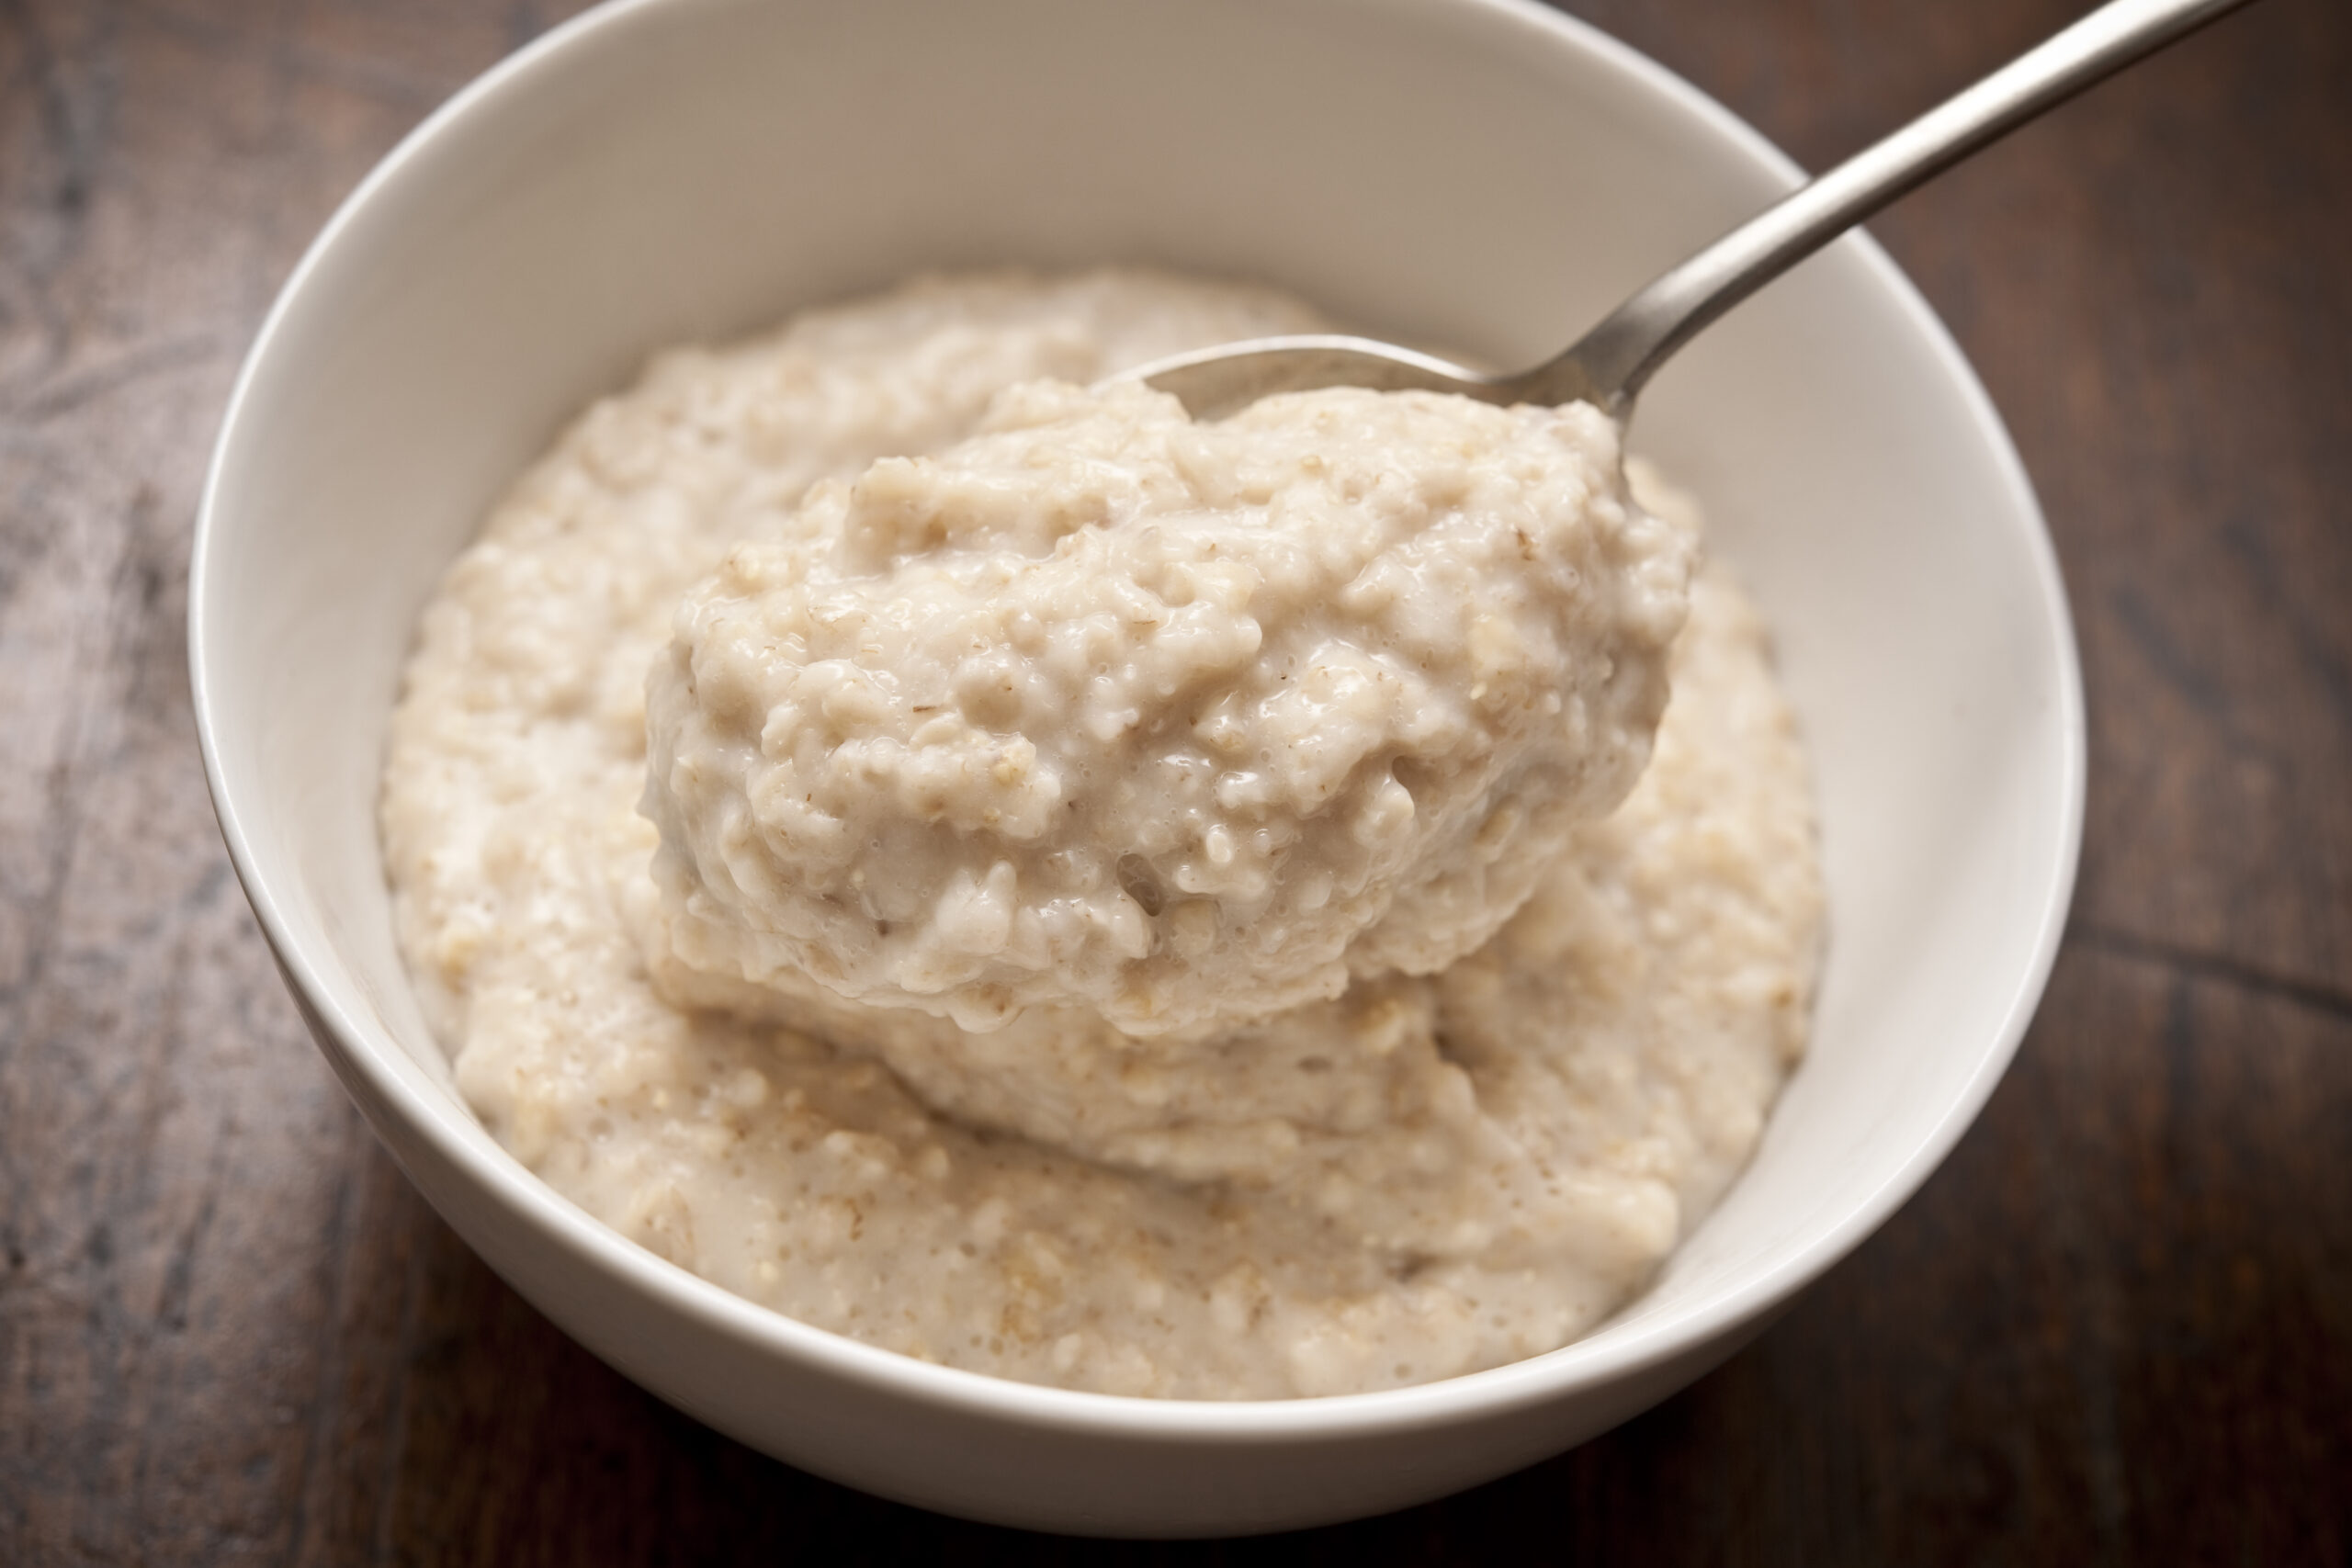 bowl of Oatmeal from above with spoon.